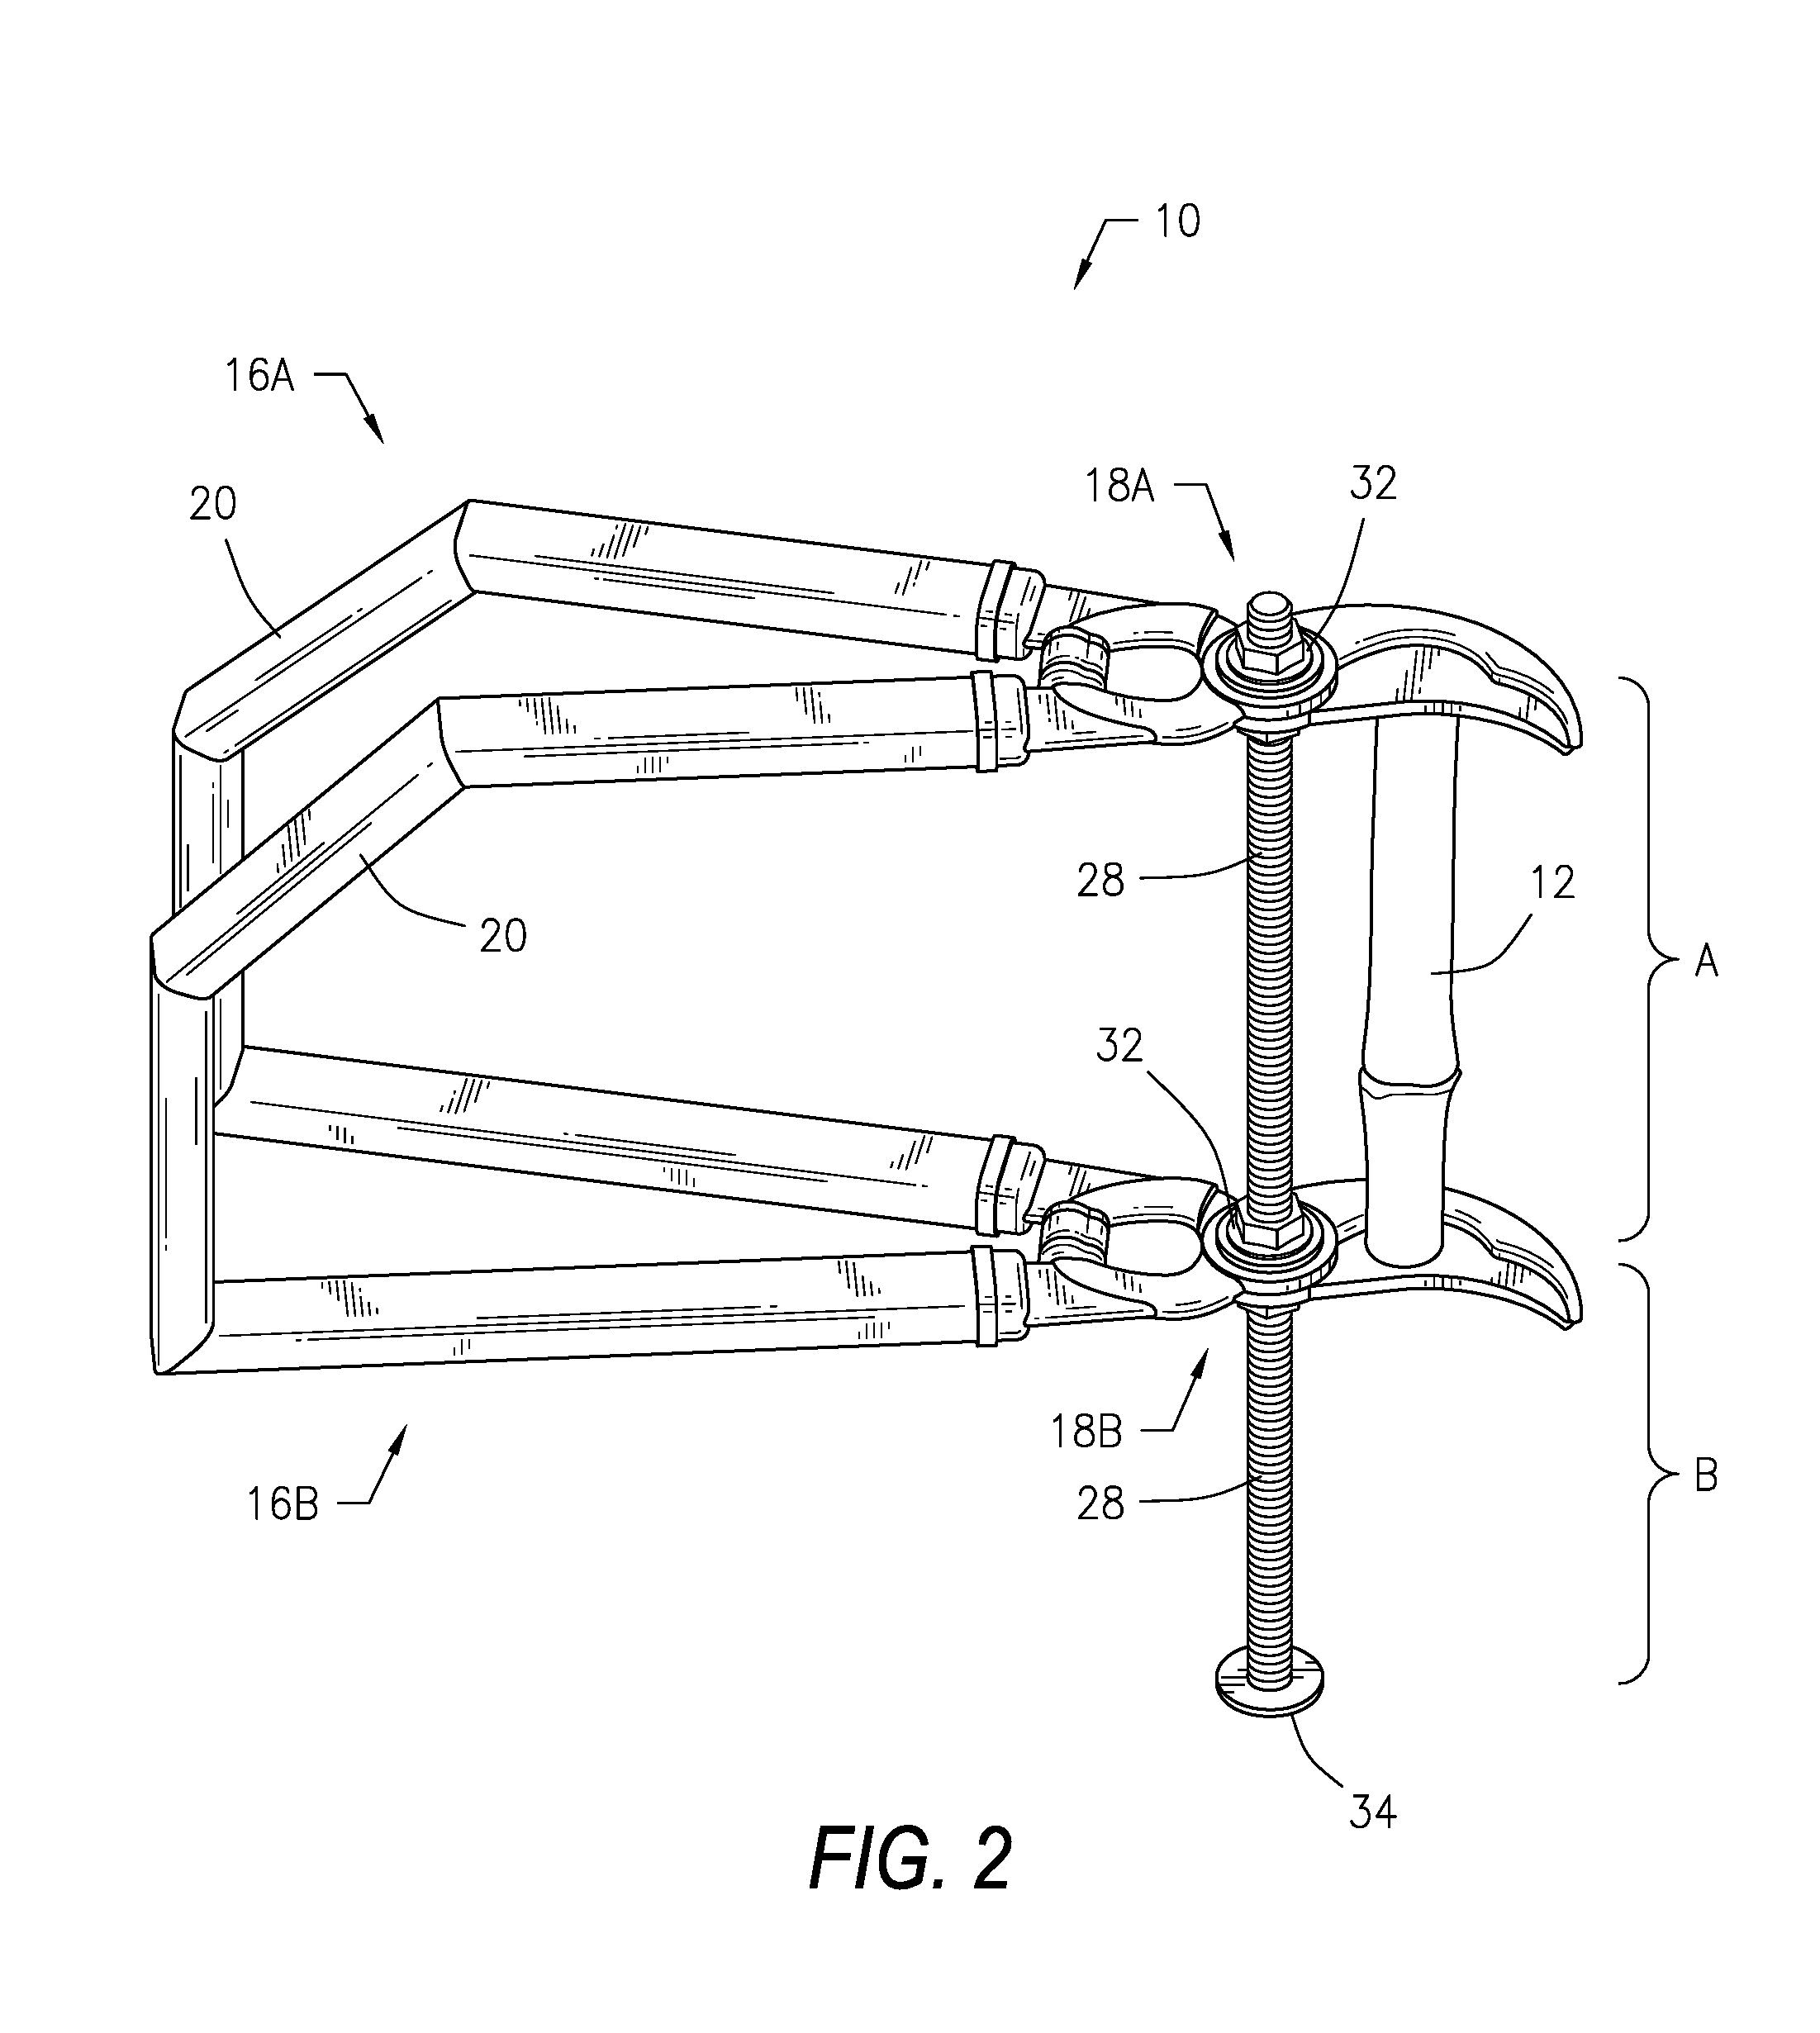 Stalk cutter device and method of use